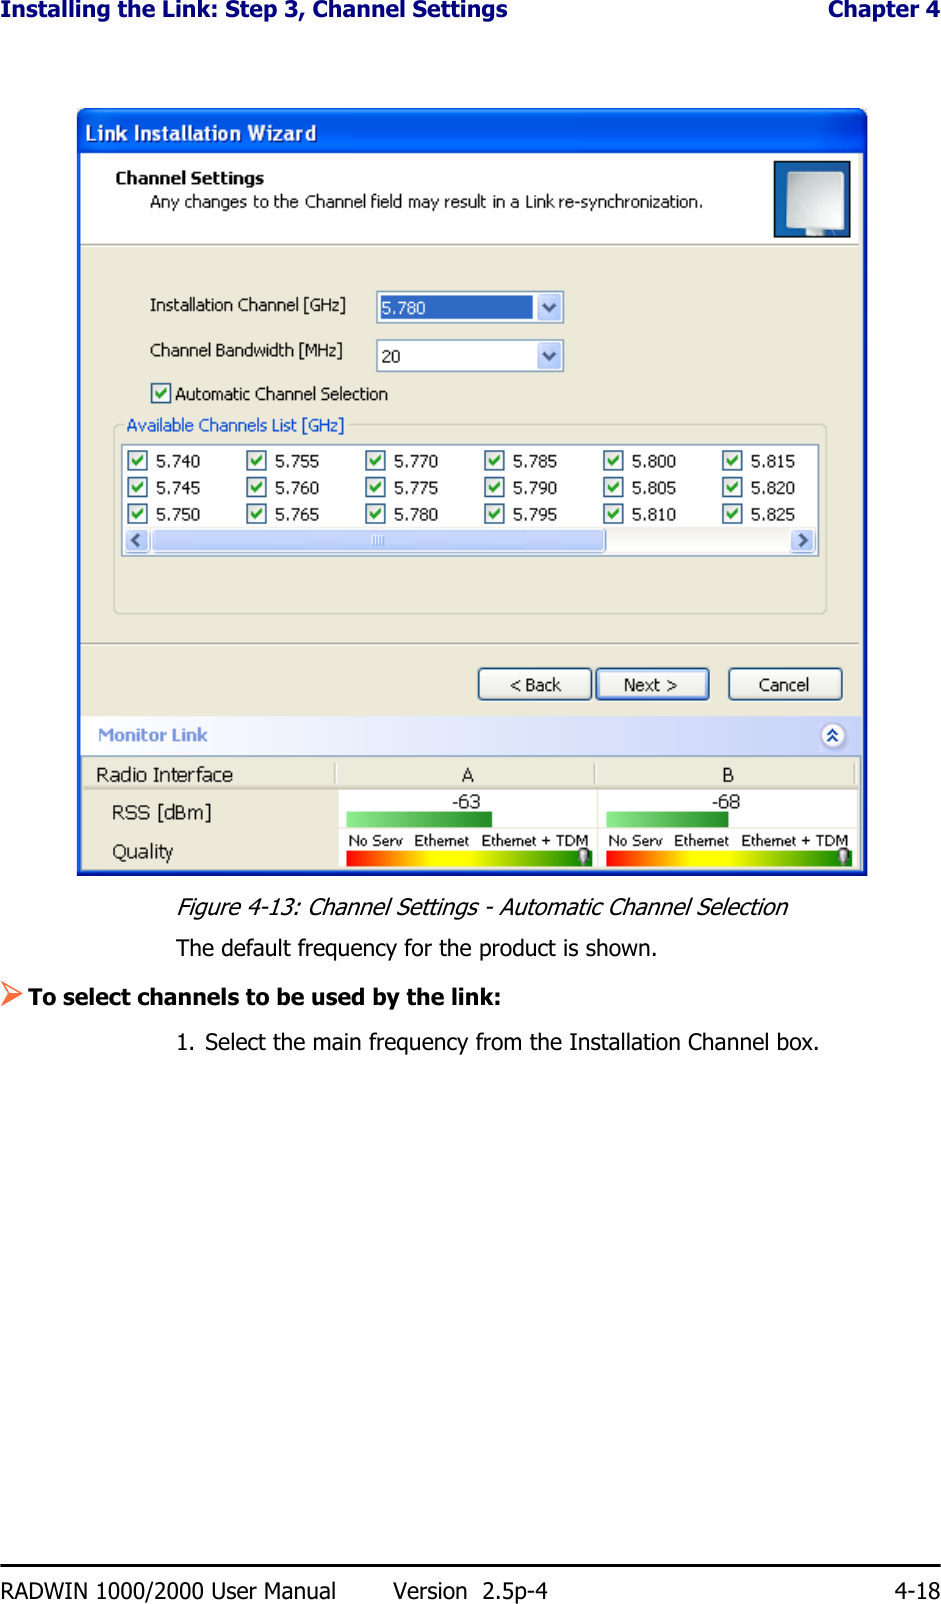 Installing the Link: Step 3, Channel Settings  Chapter 4RADWIN 1000/2000 User Manual Version  2.5p-4 4-18Figure 4-13: Channel Settings - Automatic Channel SelectionThe default frequency for the product is shown.¾To select channels to be used by the link:1. Select the main frequency from the Installation Channel box.